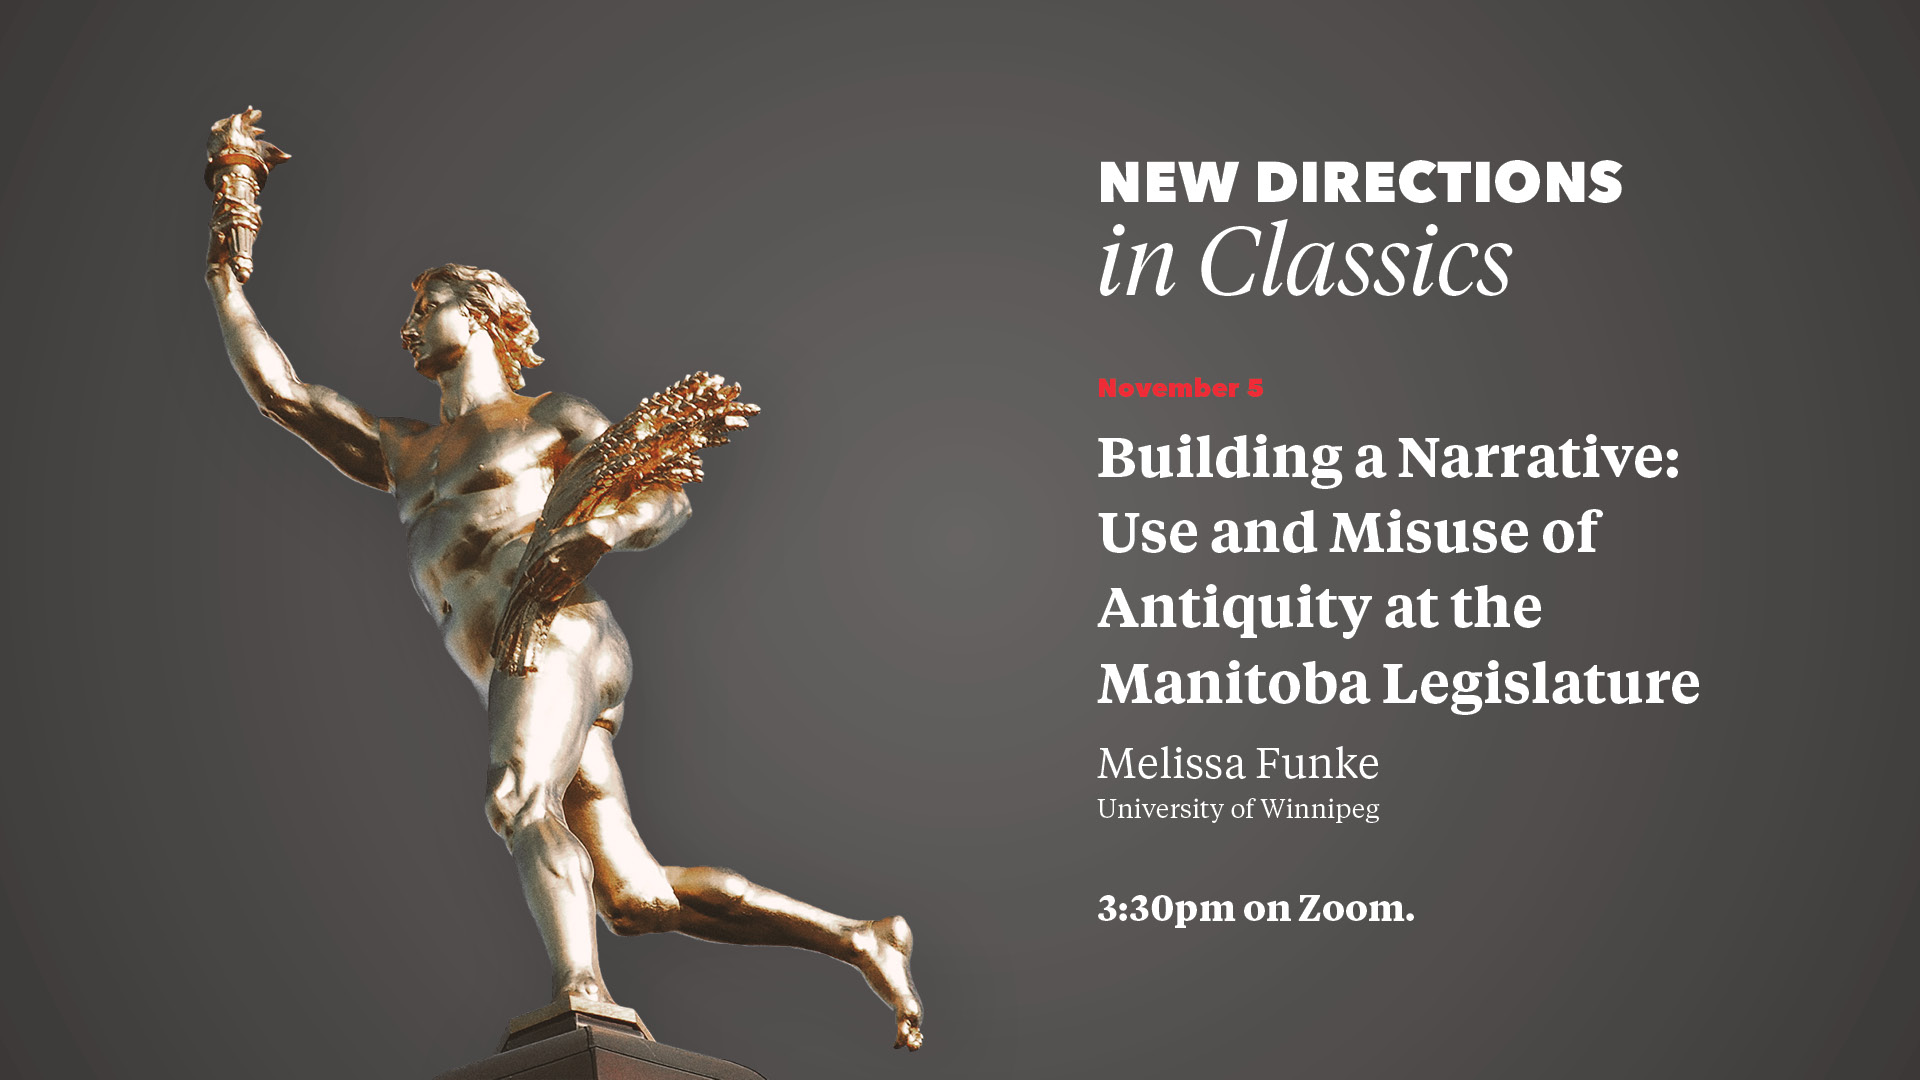 Promo image for New Directions in Classics lecture, Nov 5; full text on webpage